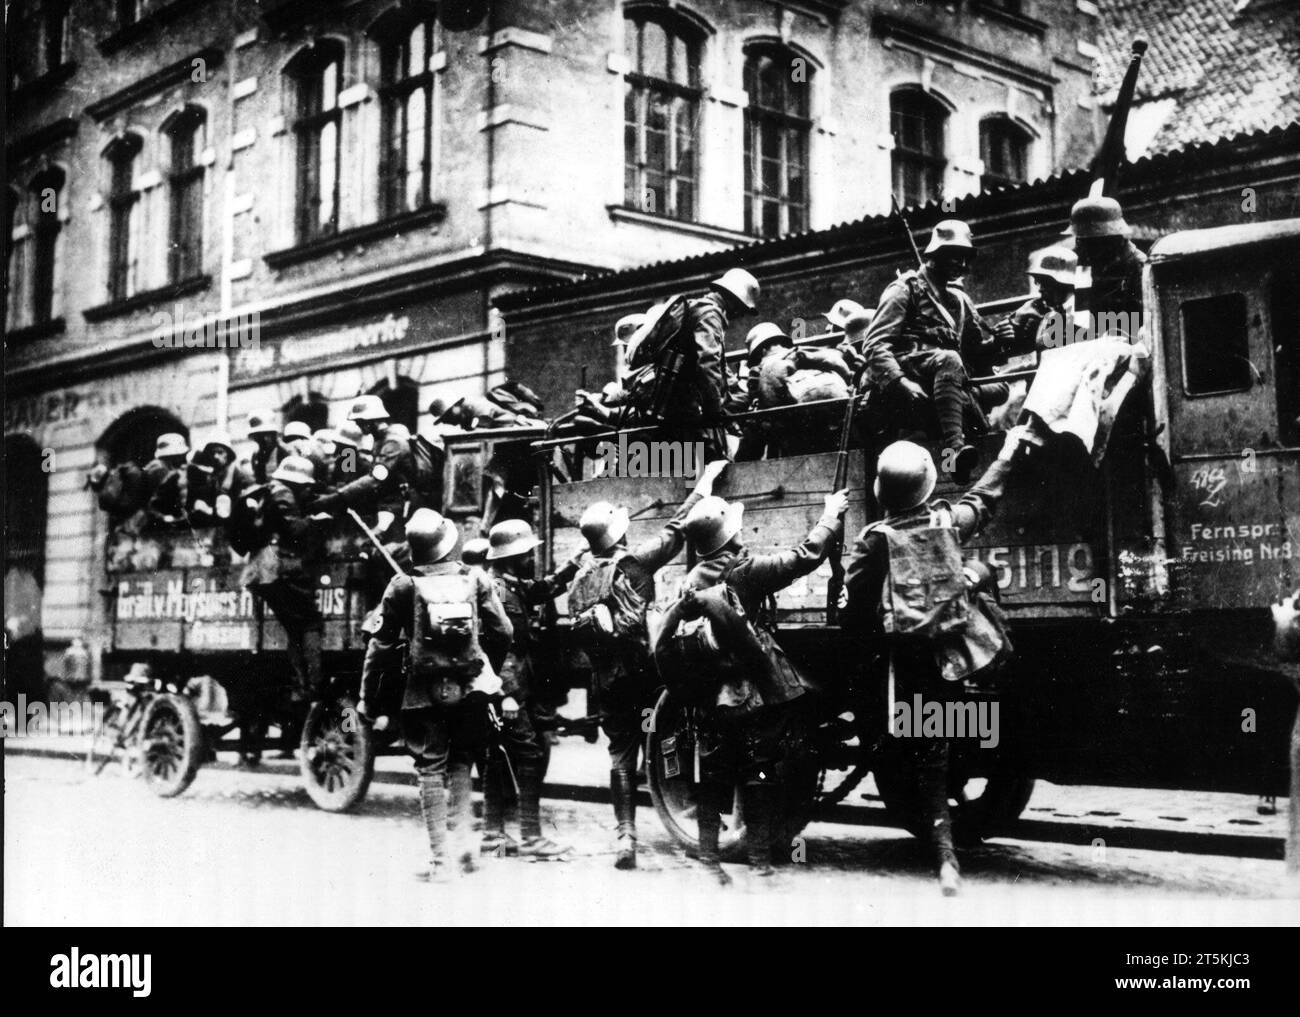 FILED - 09 November 1923, FrankfurtMain/Archiv: SA troops from the surrounding area arrive outside the Bürgerbräukeller in Munich during the so-called 'Hitler Putsch'. Nationalist forces wanted to conquer Germany from Munich 100 years ago. 'The government of the November criminals in Berlin has been declared deposed today,' proclaimed Adolf Hitler, Erich Ludendorff and like-minded people on November 8, 1923. On November 9, the putsch by the enemies of democracy ended with 20 dead and many injured. The National Socialist German Workers' Party (NSDAP) was banned and Hitler was convicted of high Stock Photo